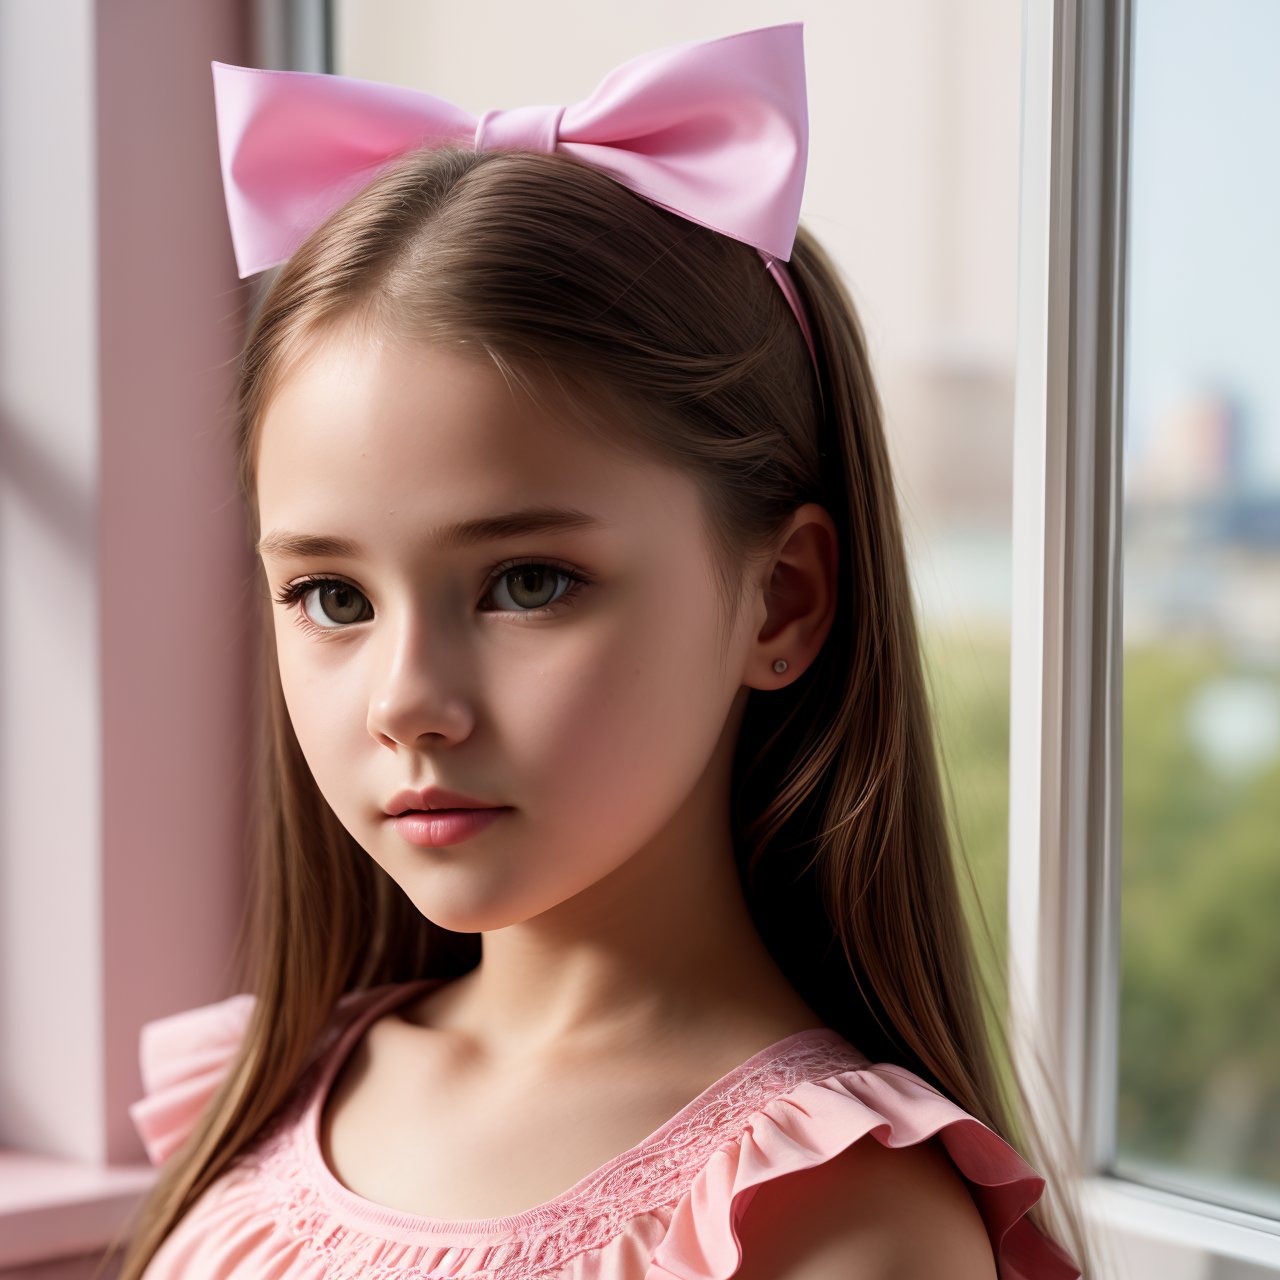 SFW, (masterpiece:1.3), wallpaper, view from below, close up of seductive (AIDA_LoRA_HanF:1.07) <lora:AIDA_LoRA_HanF:0.66> in a pink shirt and with a pink bow on her head posing for a picture in front of window, sunlight, little girl, pretty face, seductive, cinematic, dramatic, insane level of details, intricate pattern, studio photo, kkw-ph1, hdr, f1.6, getty images